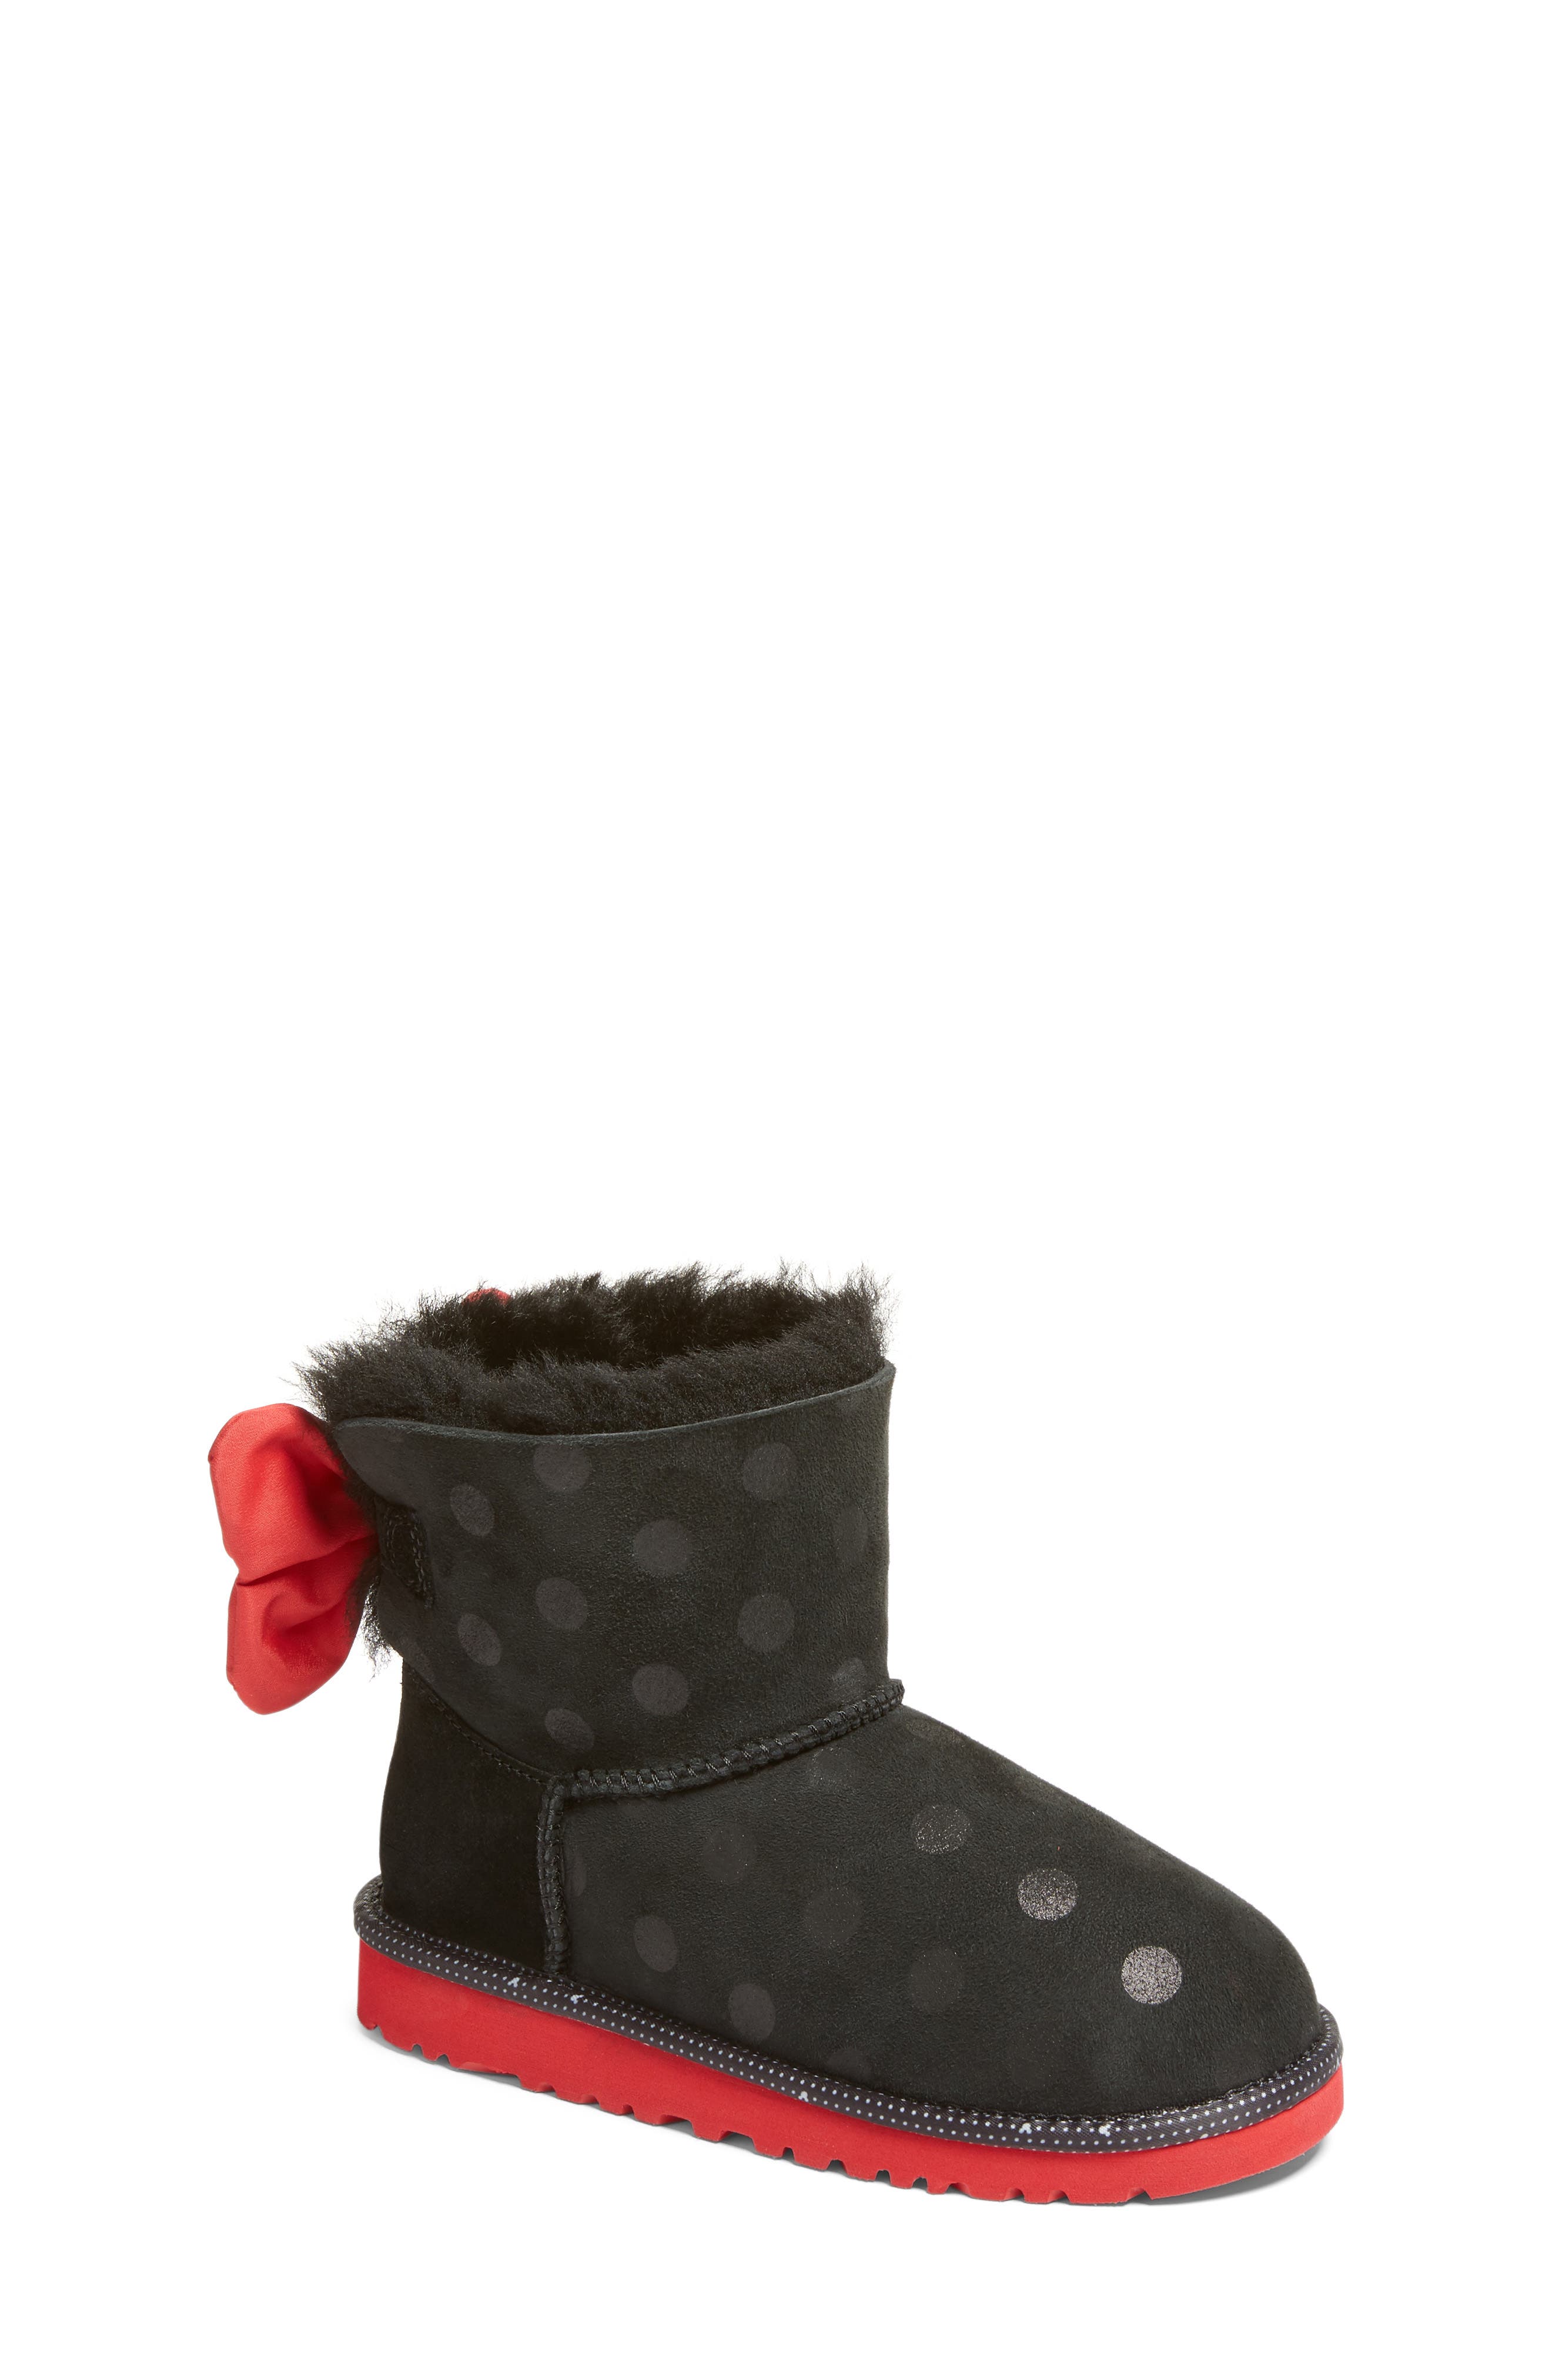 disney uggs for toddlers 